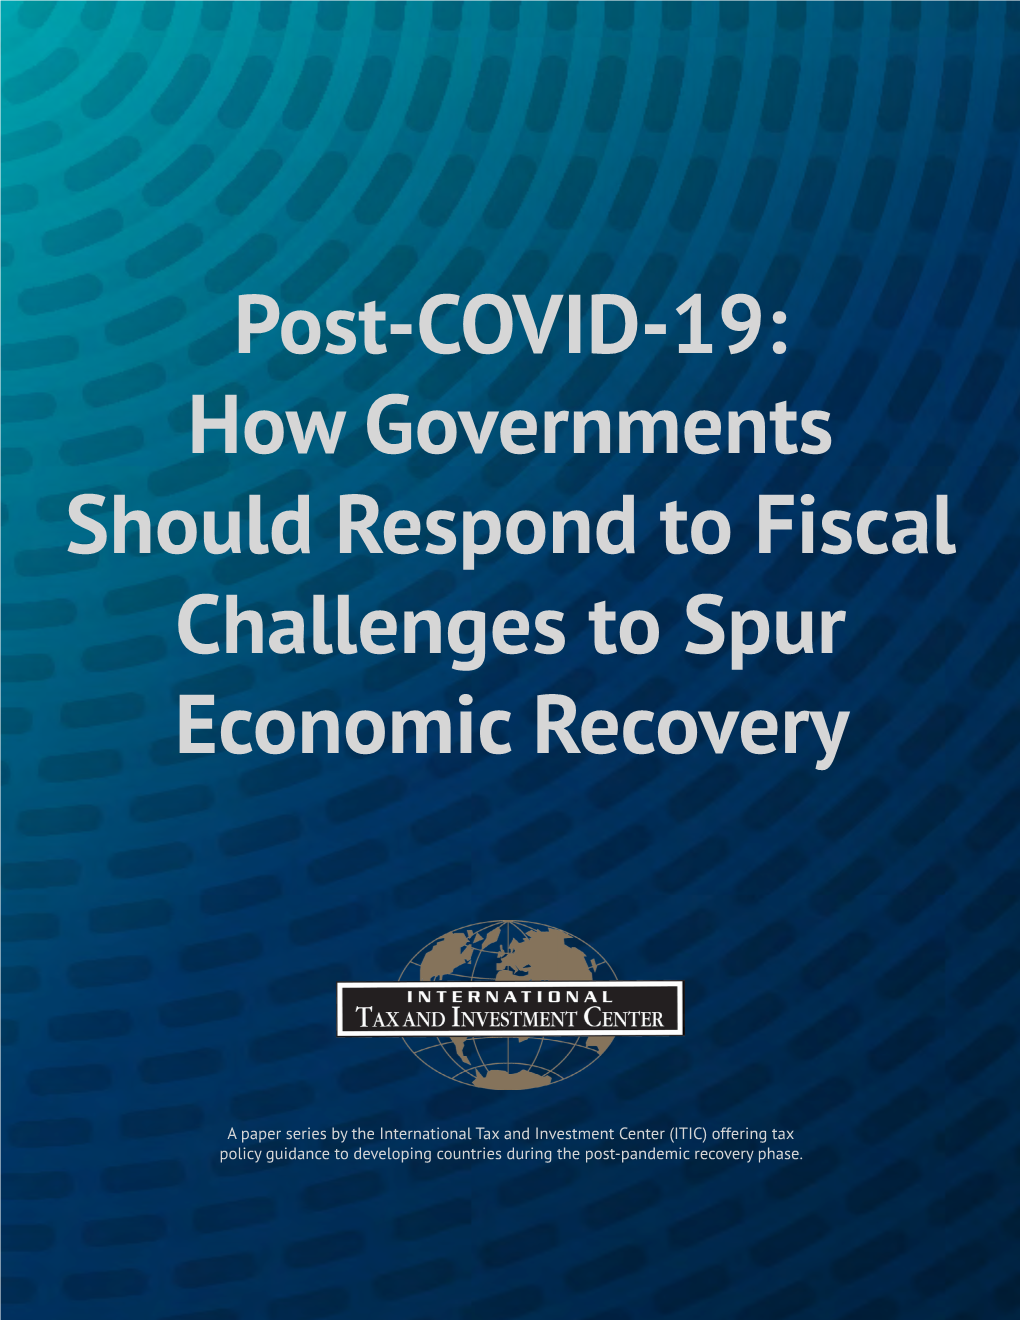 Post-COVID-19: How Governments Should Respond to Fiscal Challenges to Spur Economic Recovery